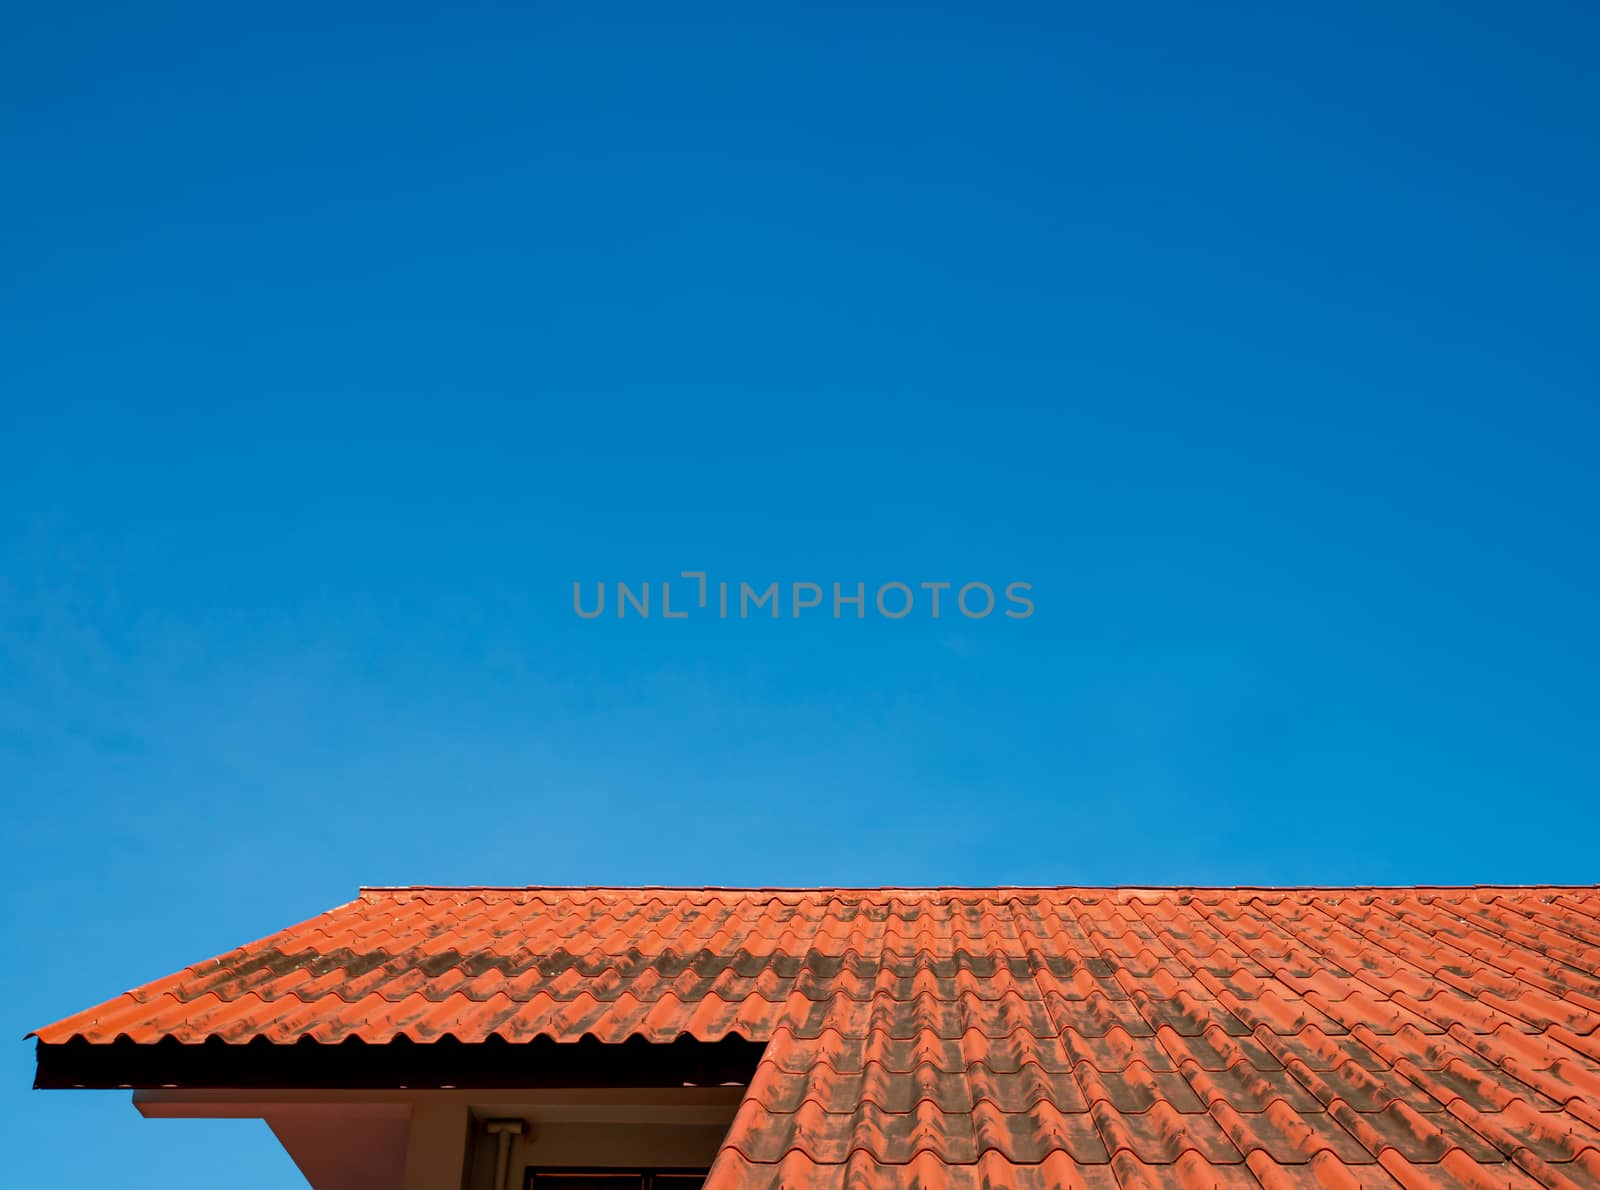 The roof tiles of the building have a background of blue skies o by Unimages2527